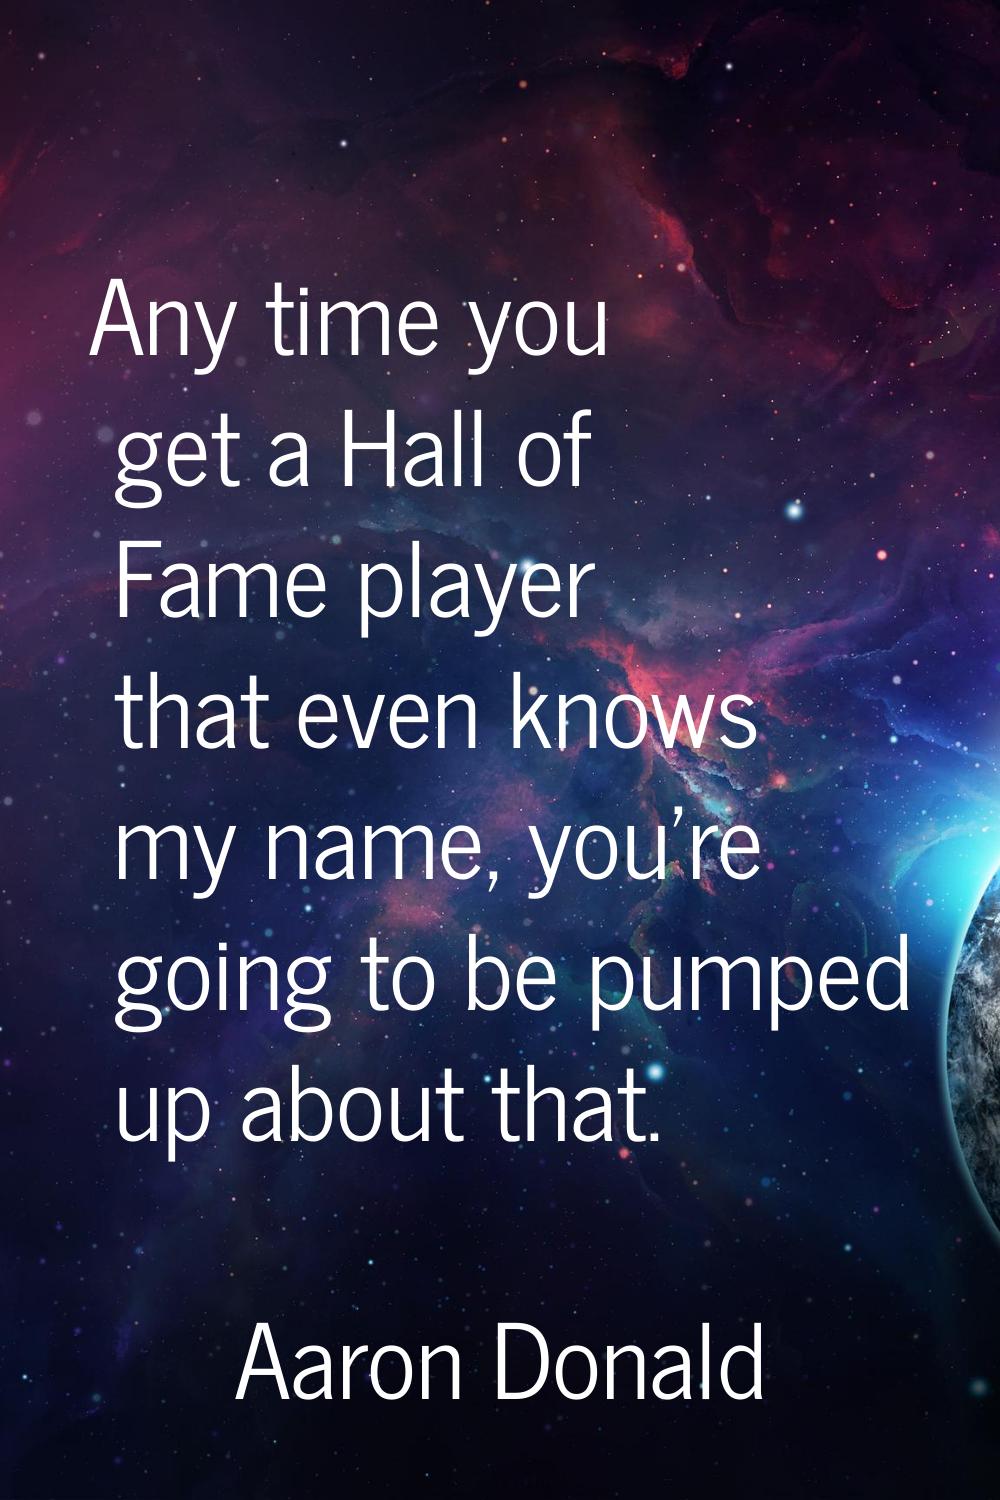 Any time you get a Hall of Fame player that even knows my name, you're going to be pumped up about 